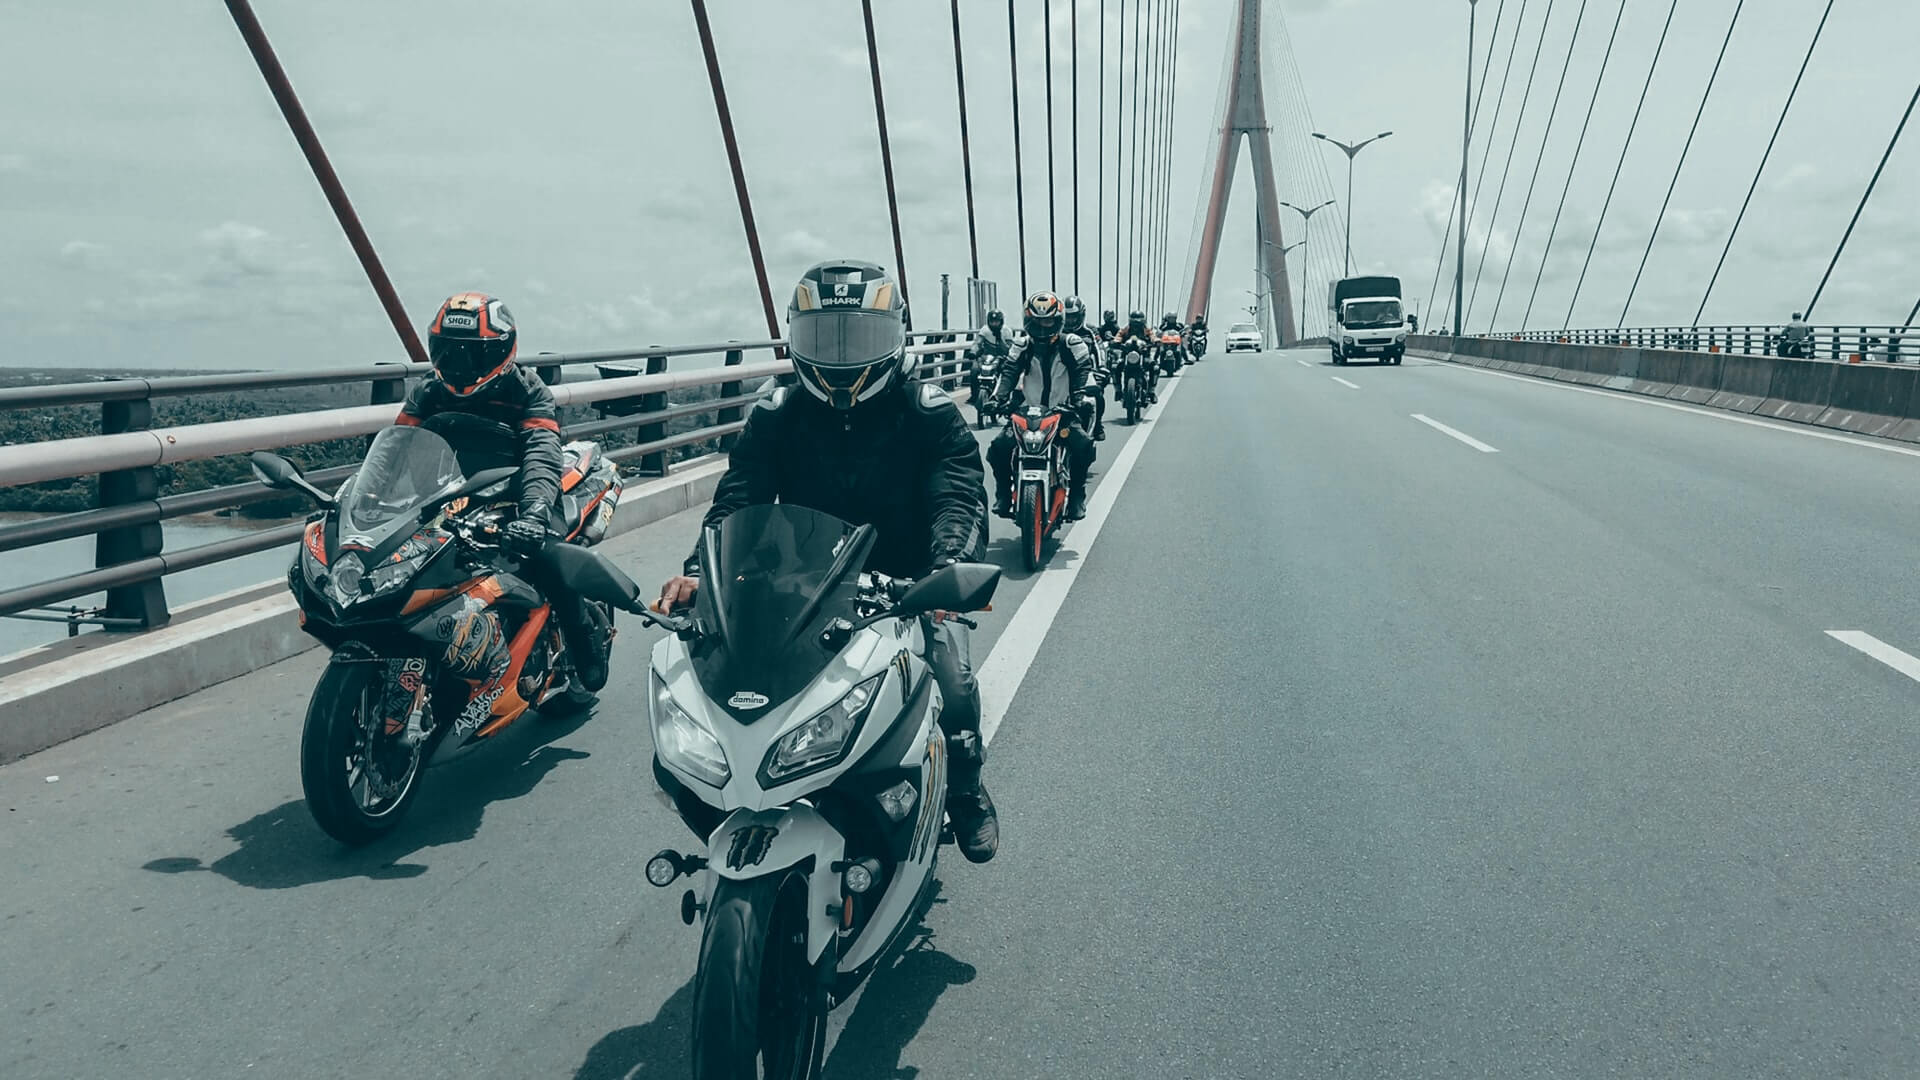 Large group of motorcyclists driving across a bridge